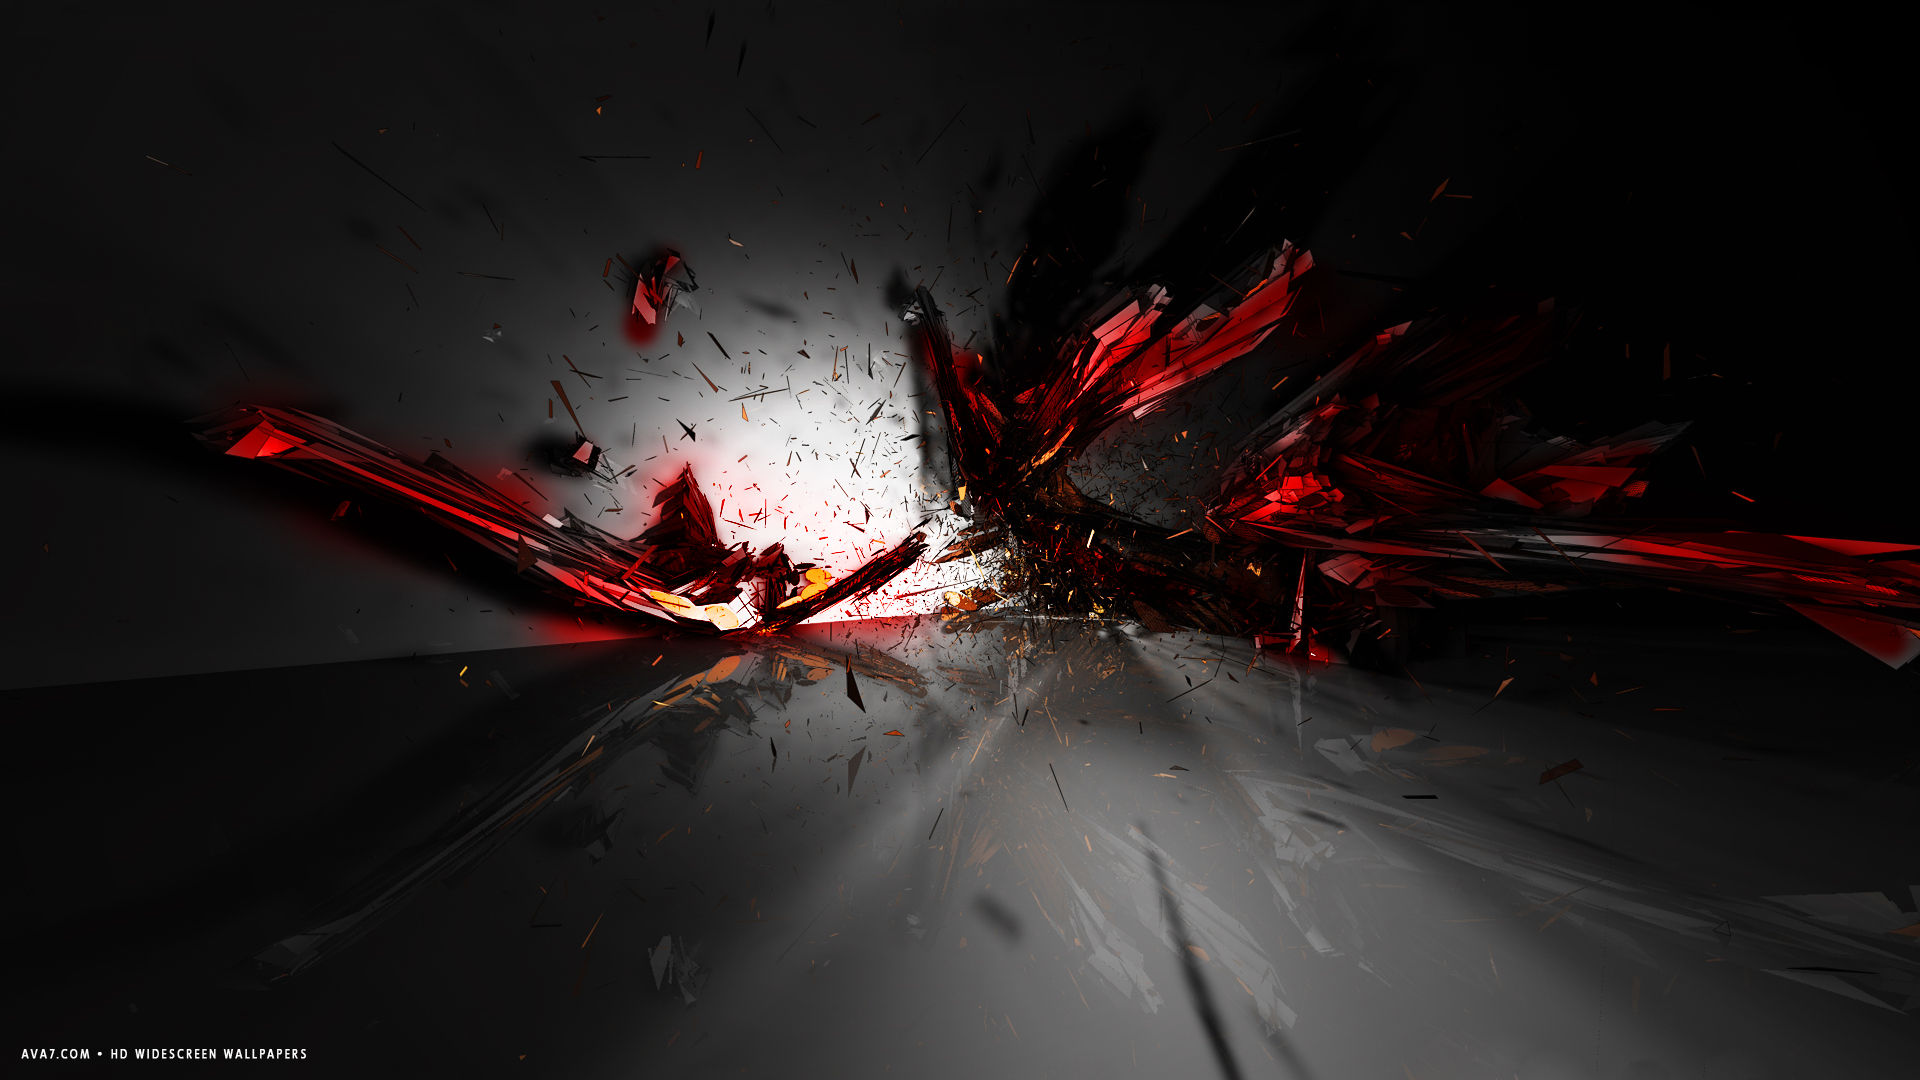 Black And Red P Wallpaper Wpt7802611 - Abstract Wallpaper Black Red , HD Wallpaper & Backgrounds